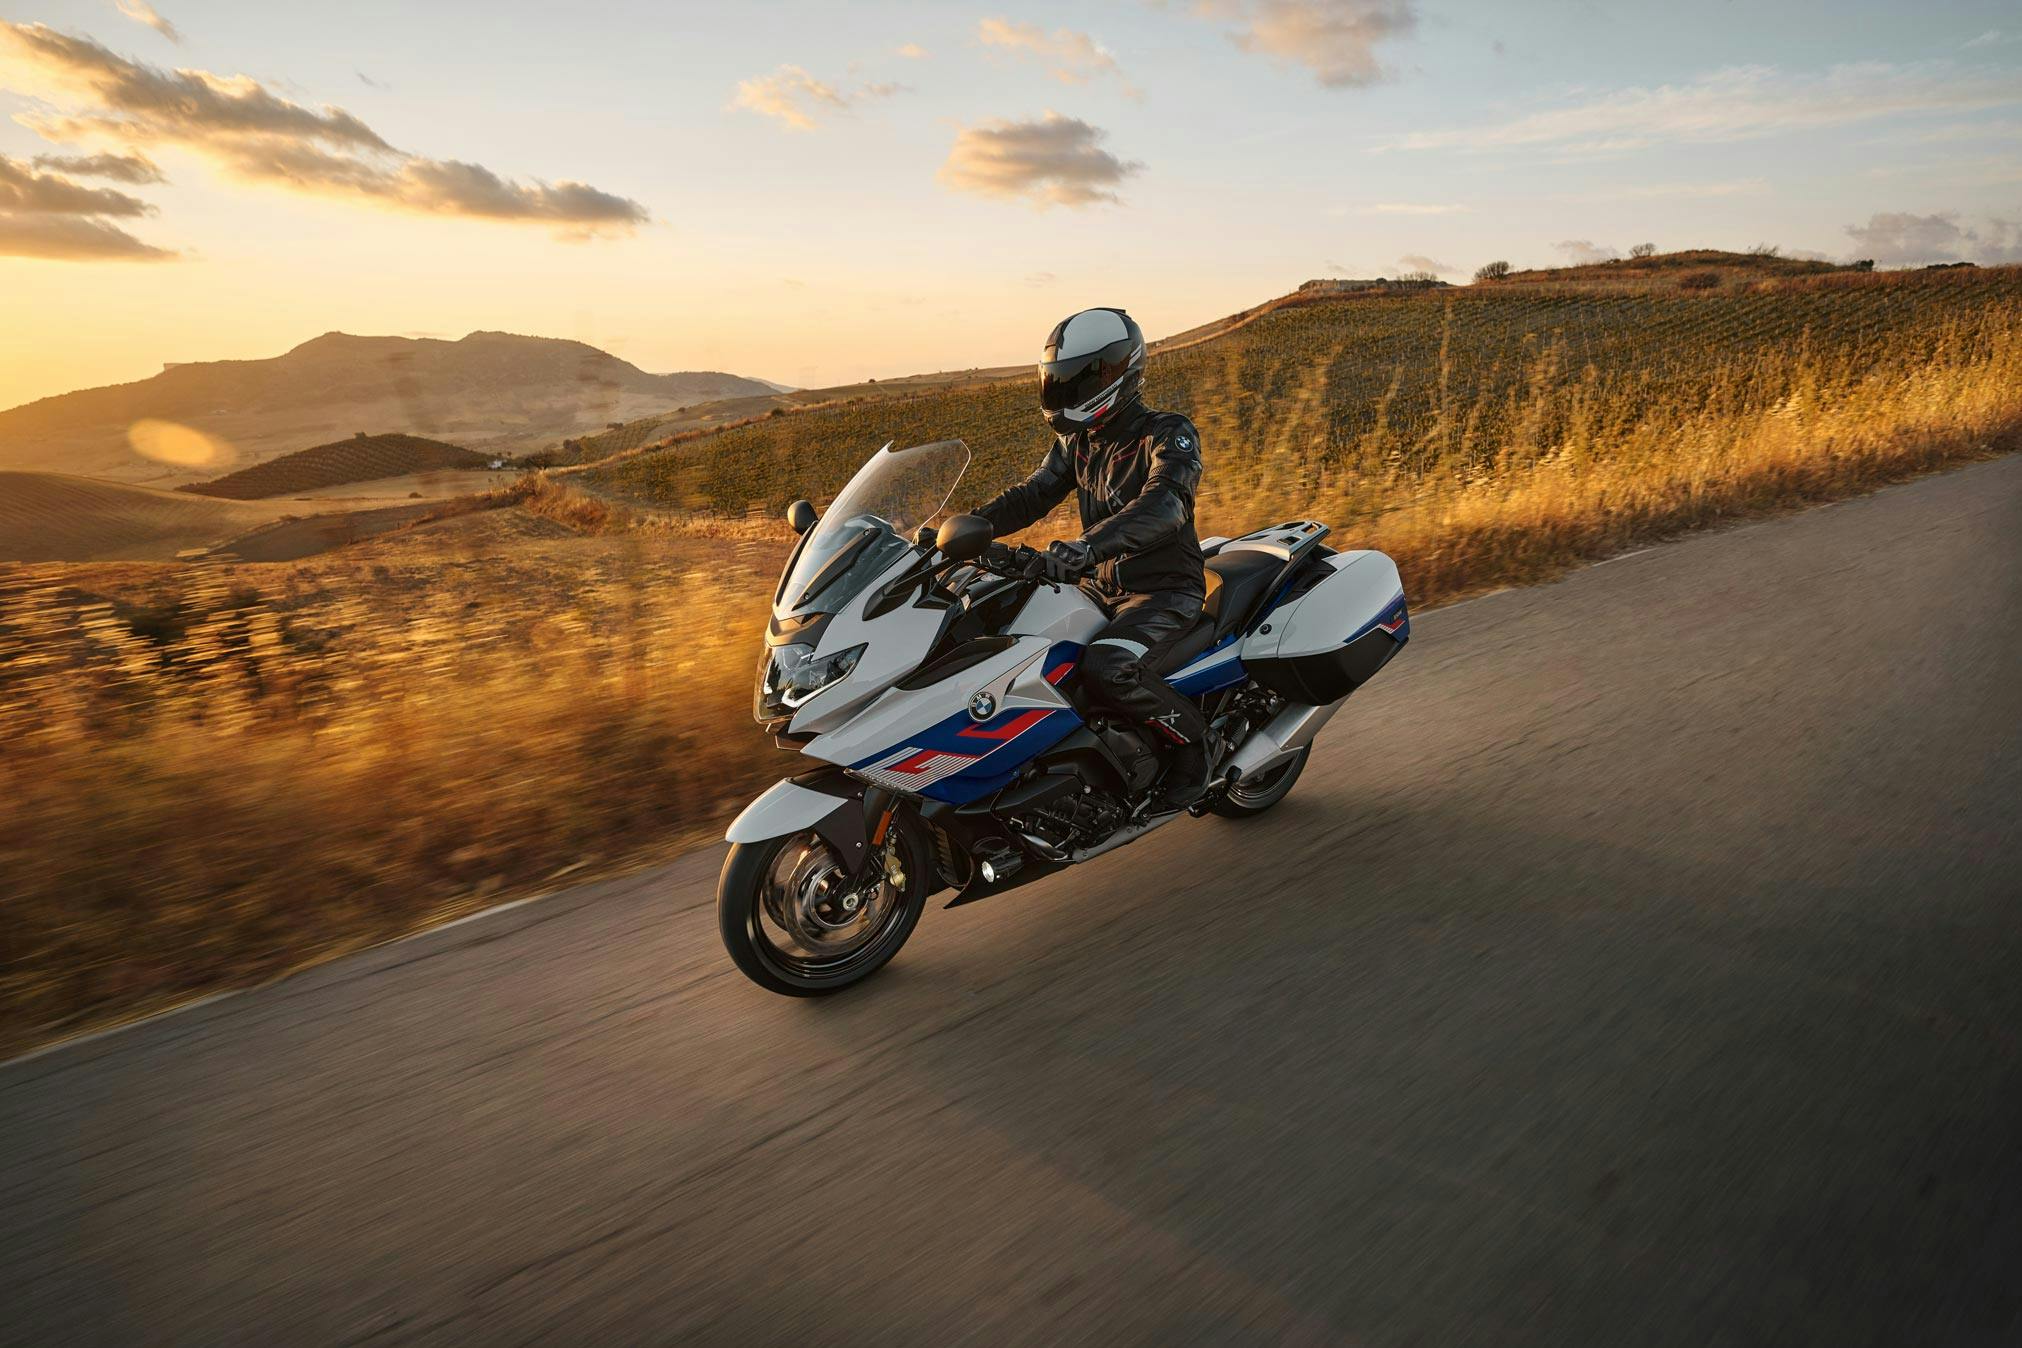 BMW K 1600 GT SPORT being ridden on the hill road